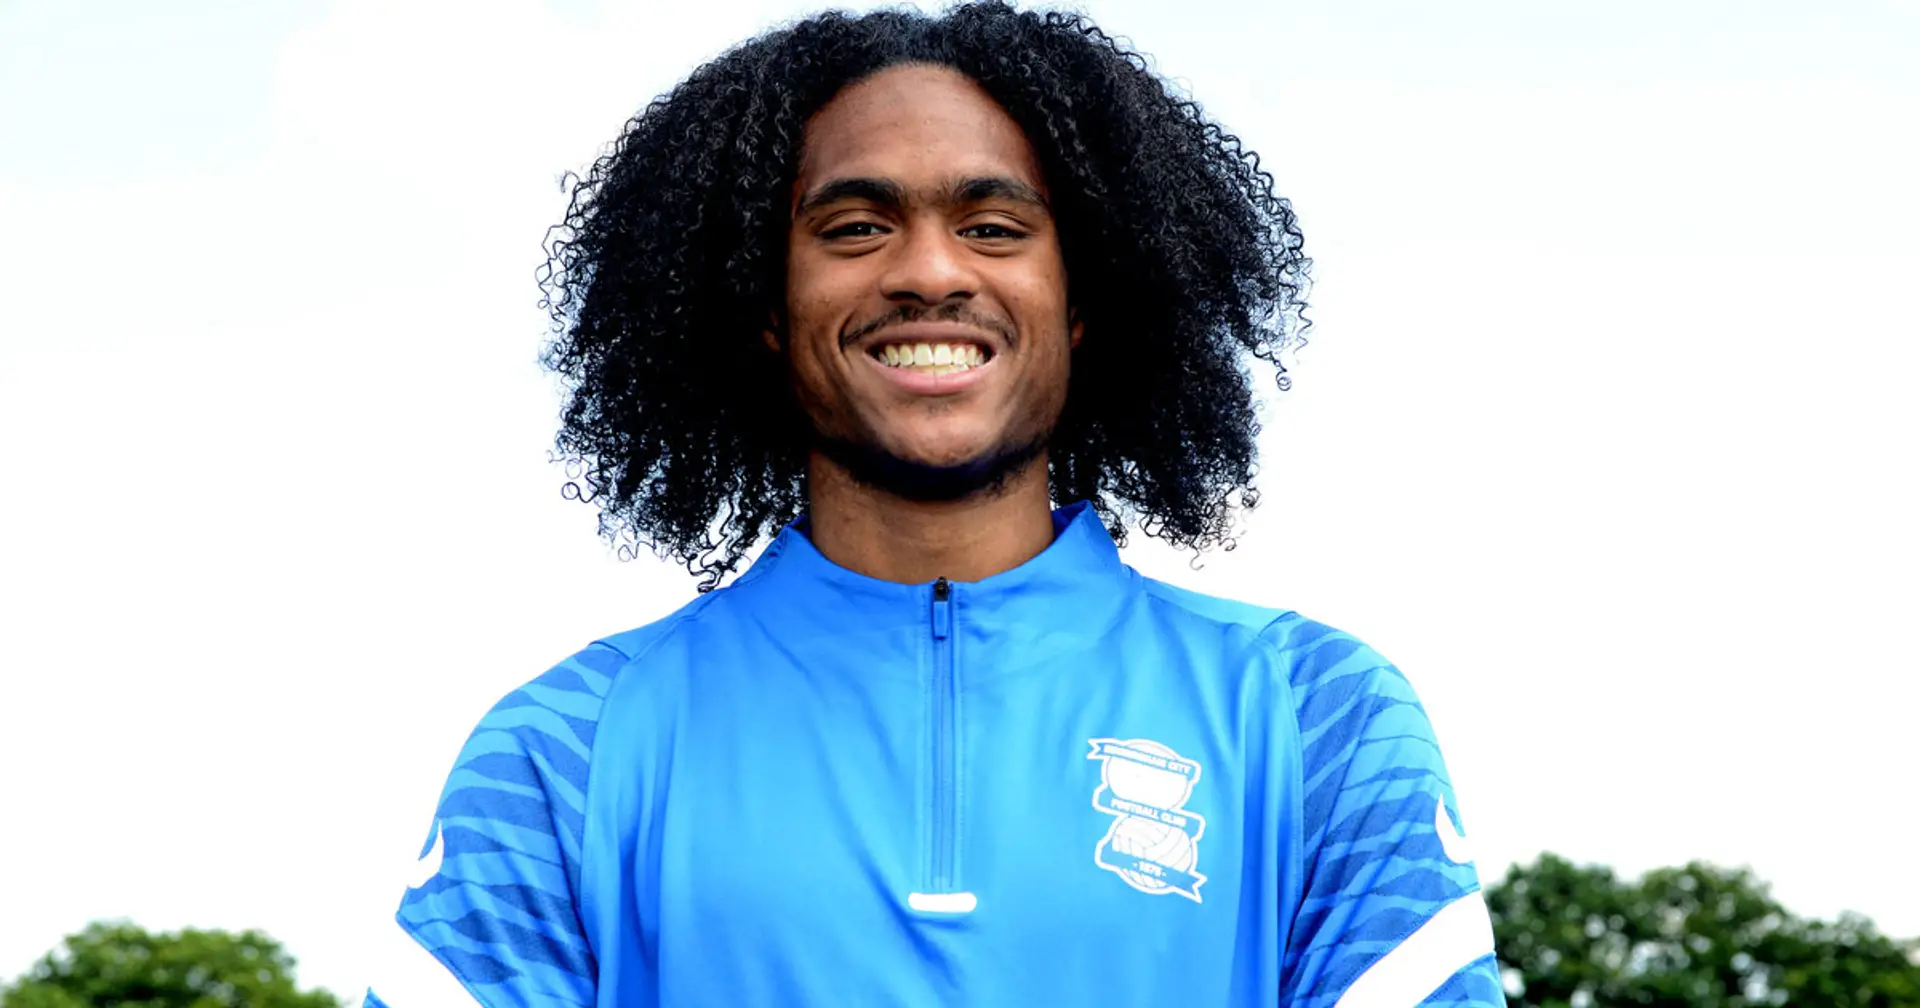 'I want to become a better player and develop': Chong opens up on loan move to Birmingham City